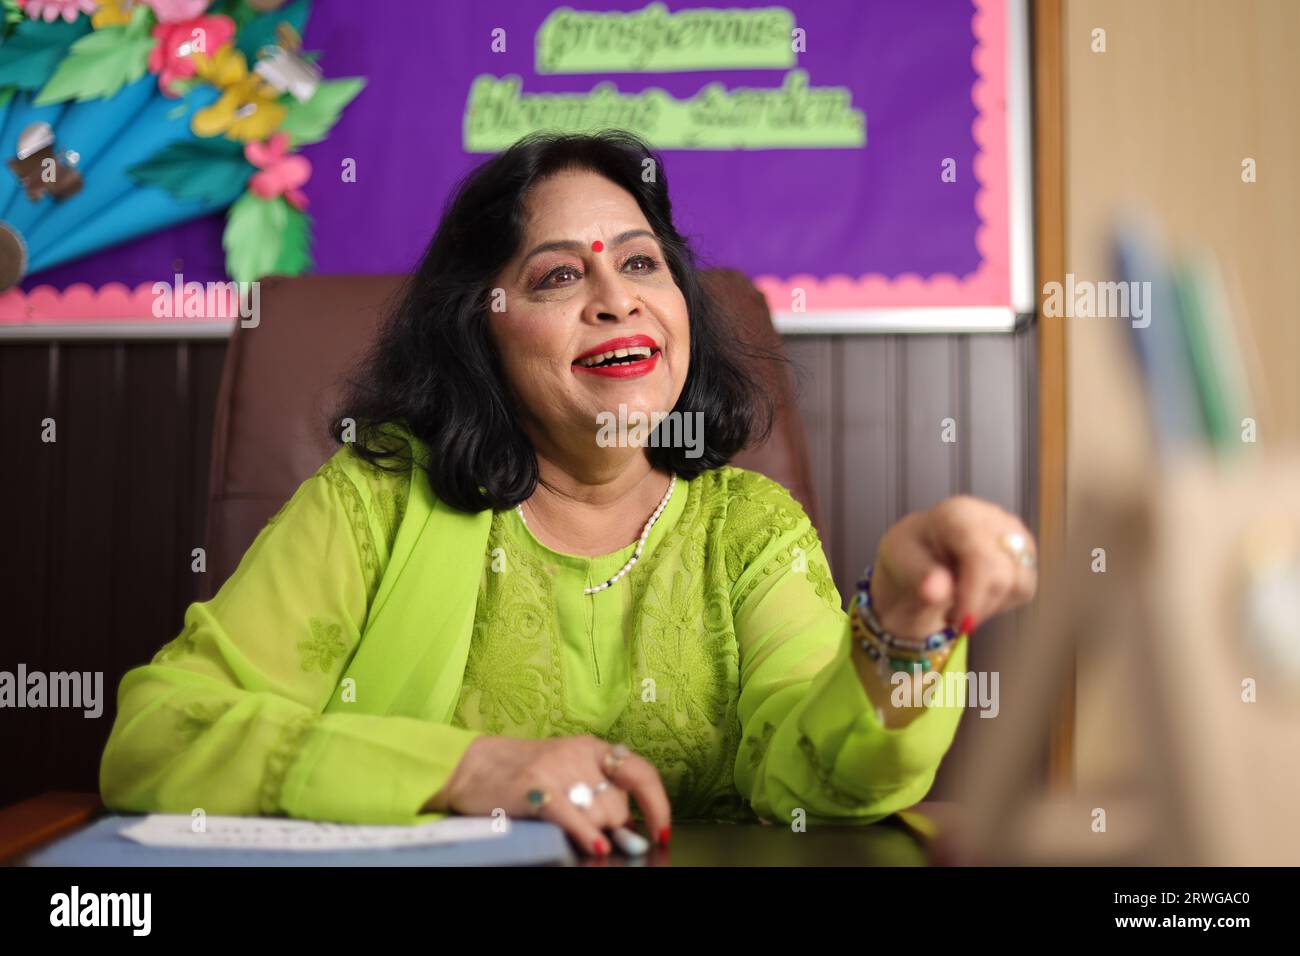 School Principal mam sitting happily, proud of the students of her school, smiling. Stock Photo